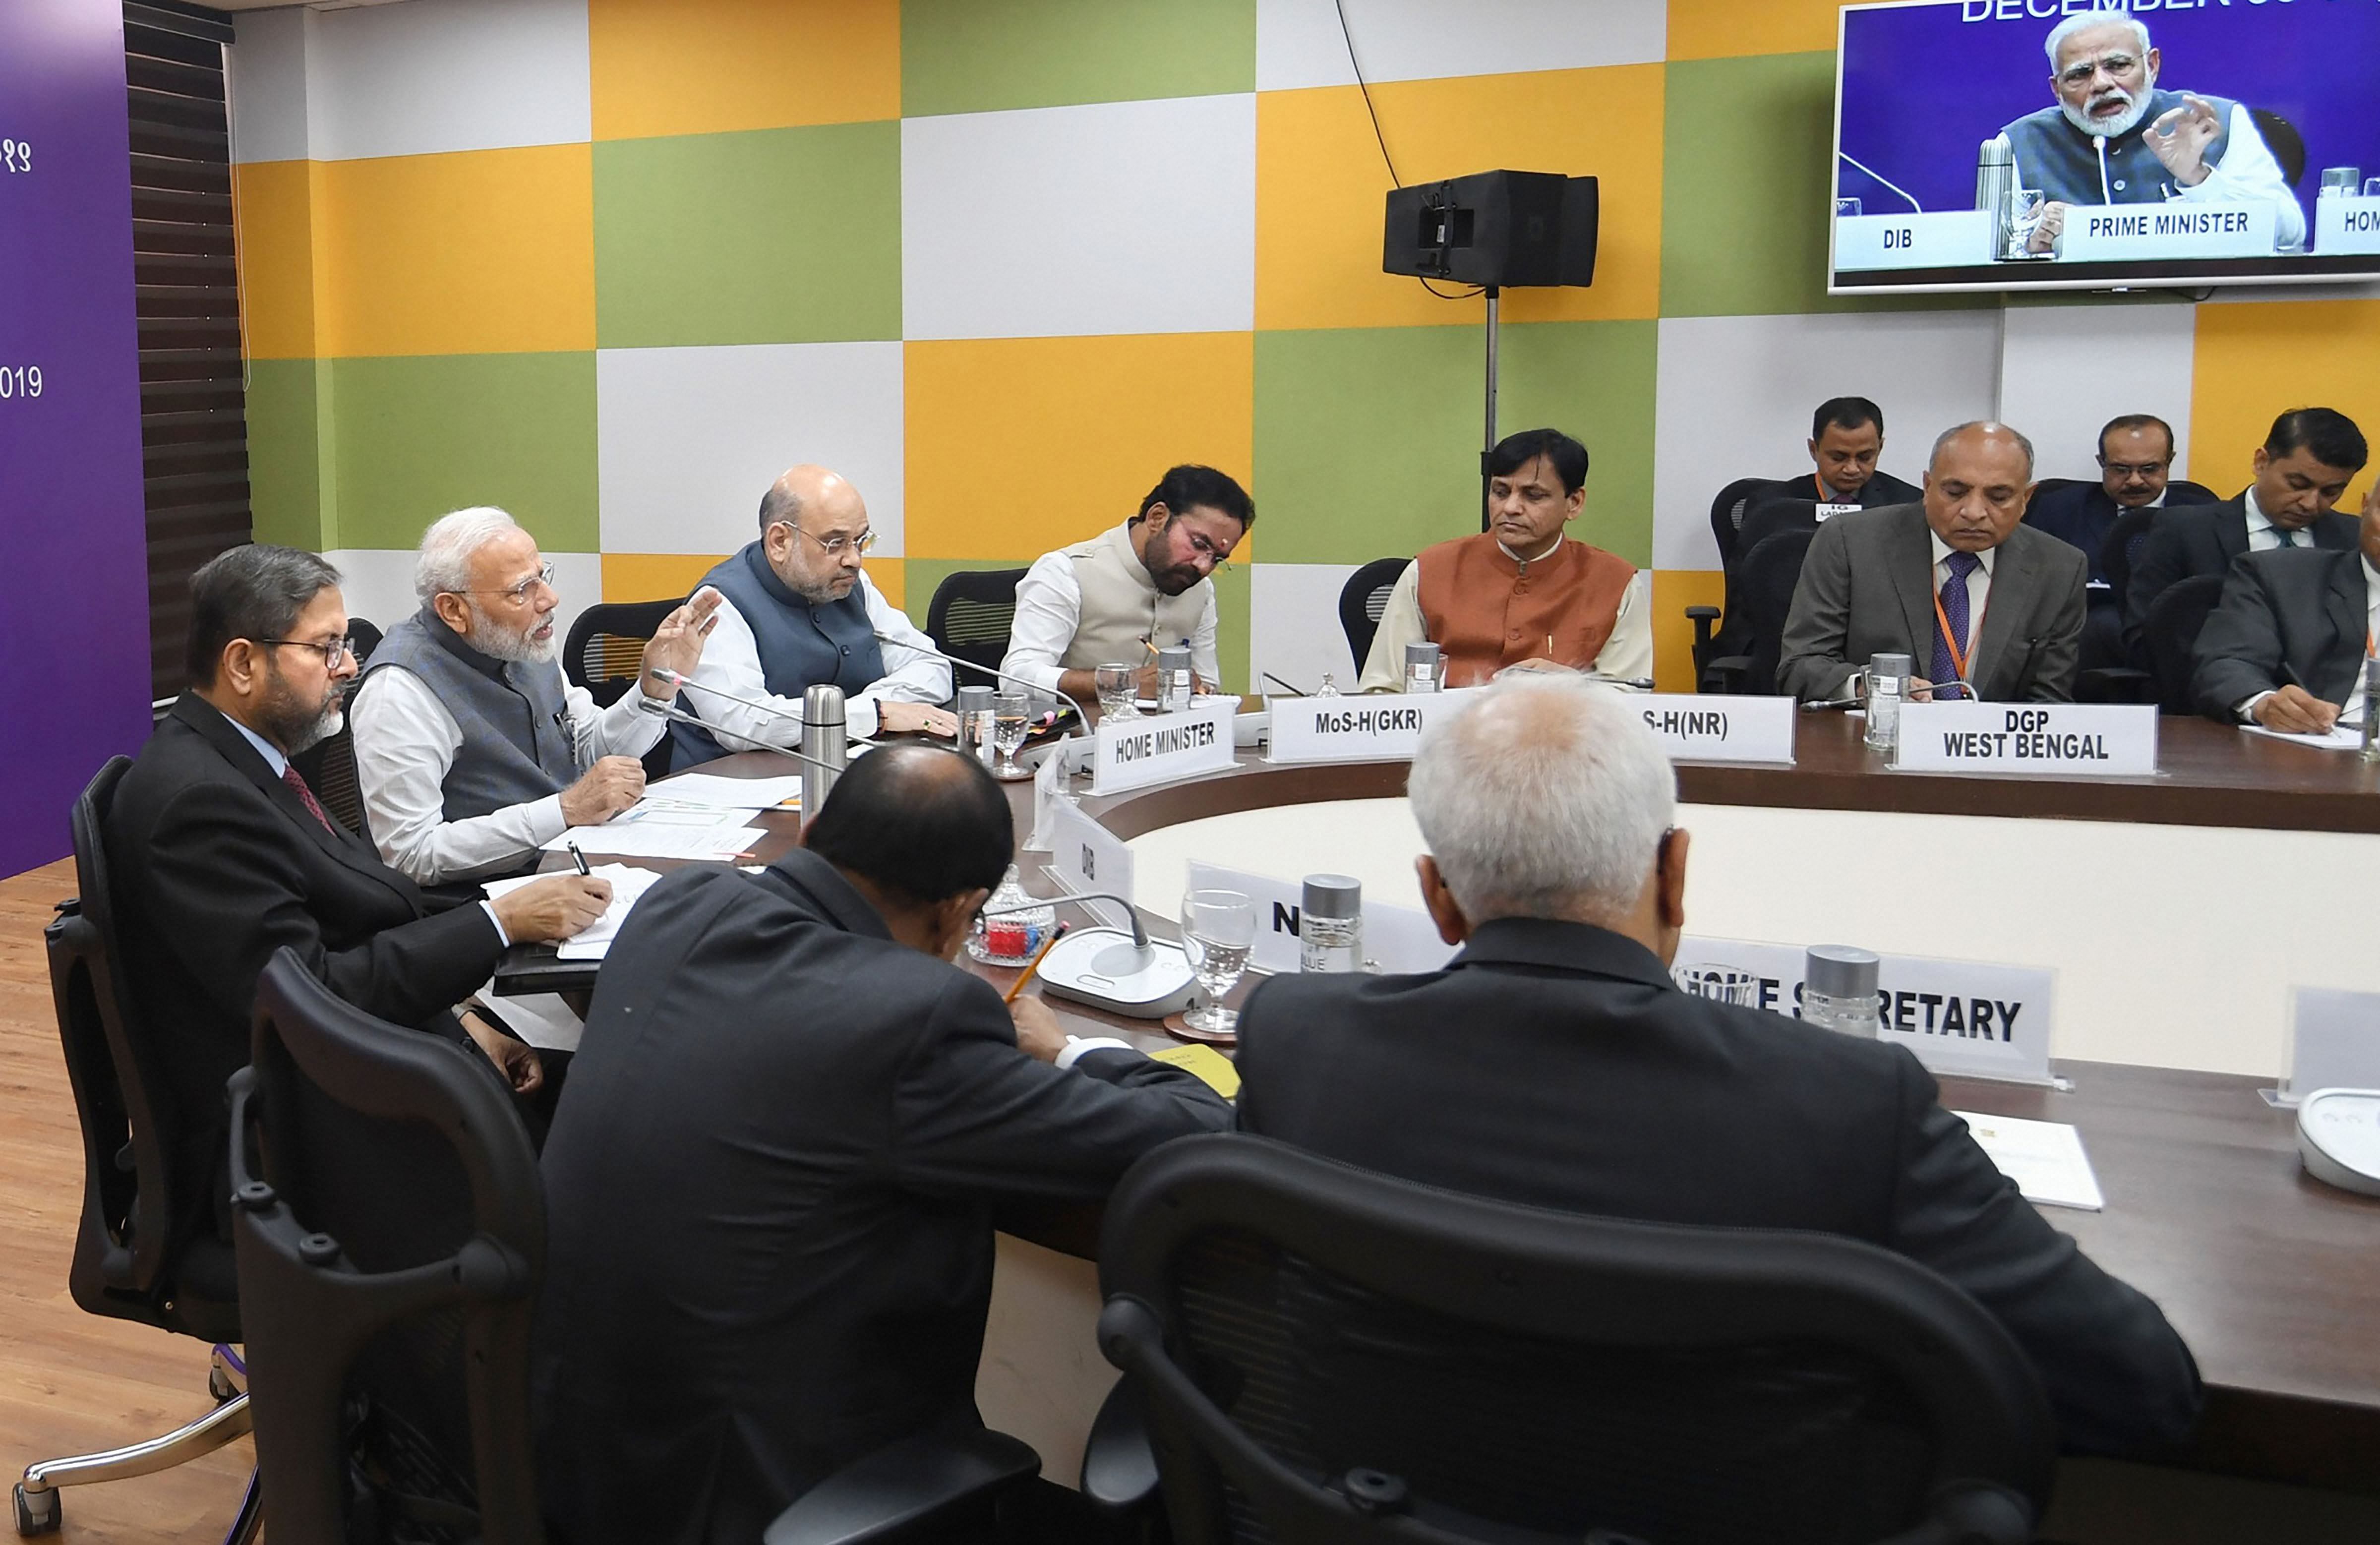 Prime Minister Narendra Modi and Union Home Minister Amit Shah at the All India Conference of Director Generals /Inspector Generals of Police-2019, at IISER in Pune. (PTI Photo)